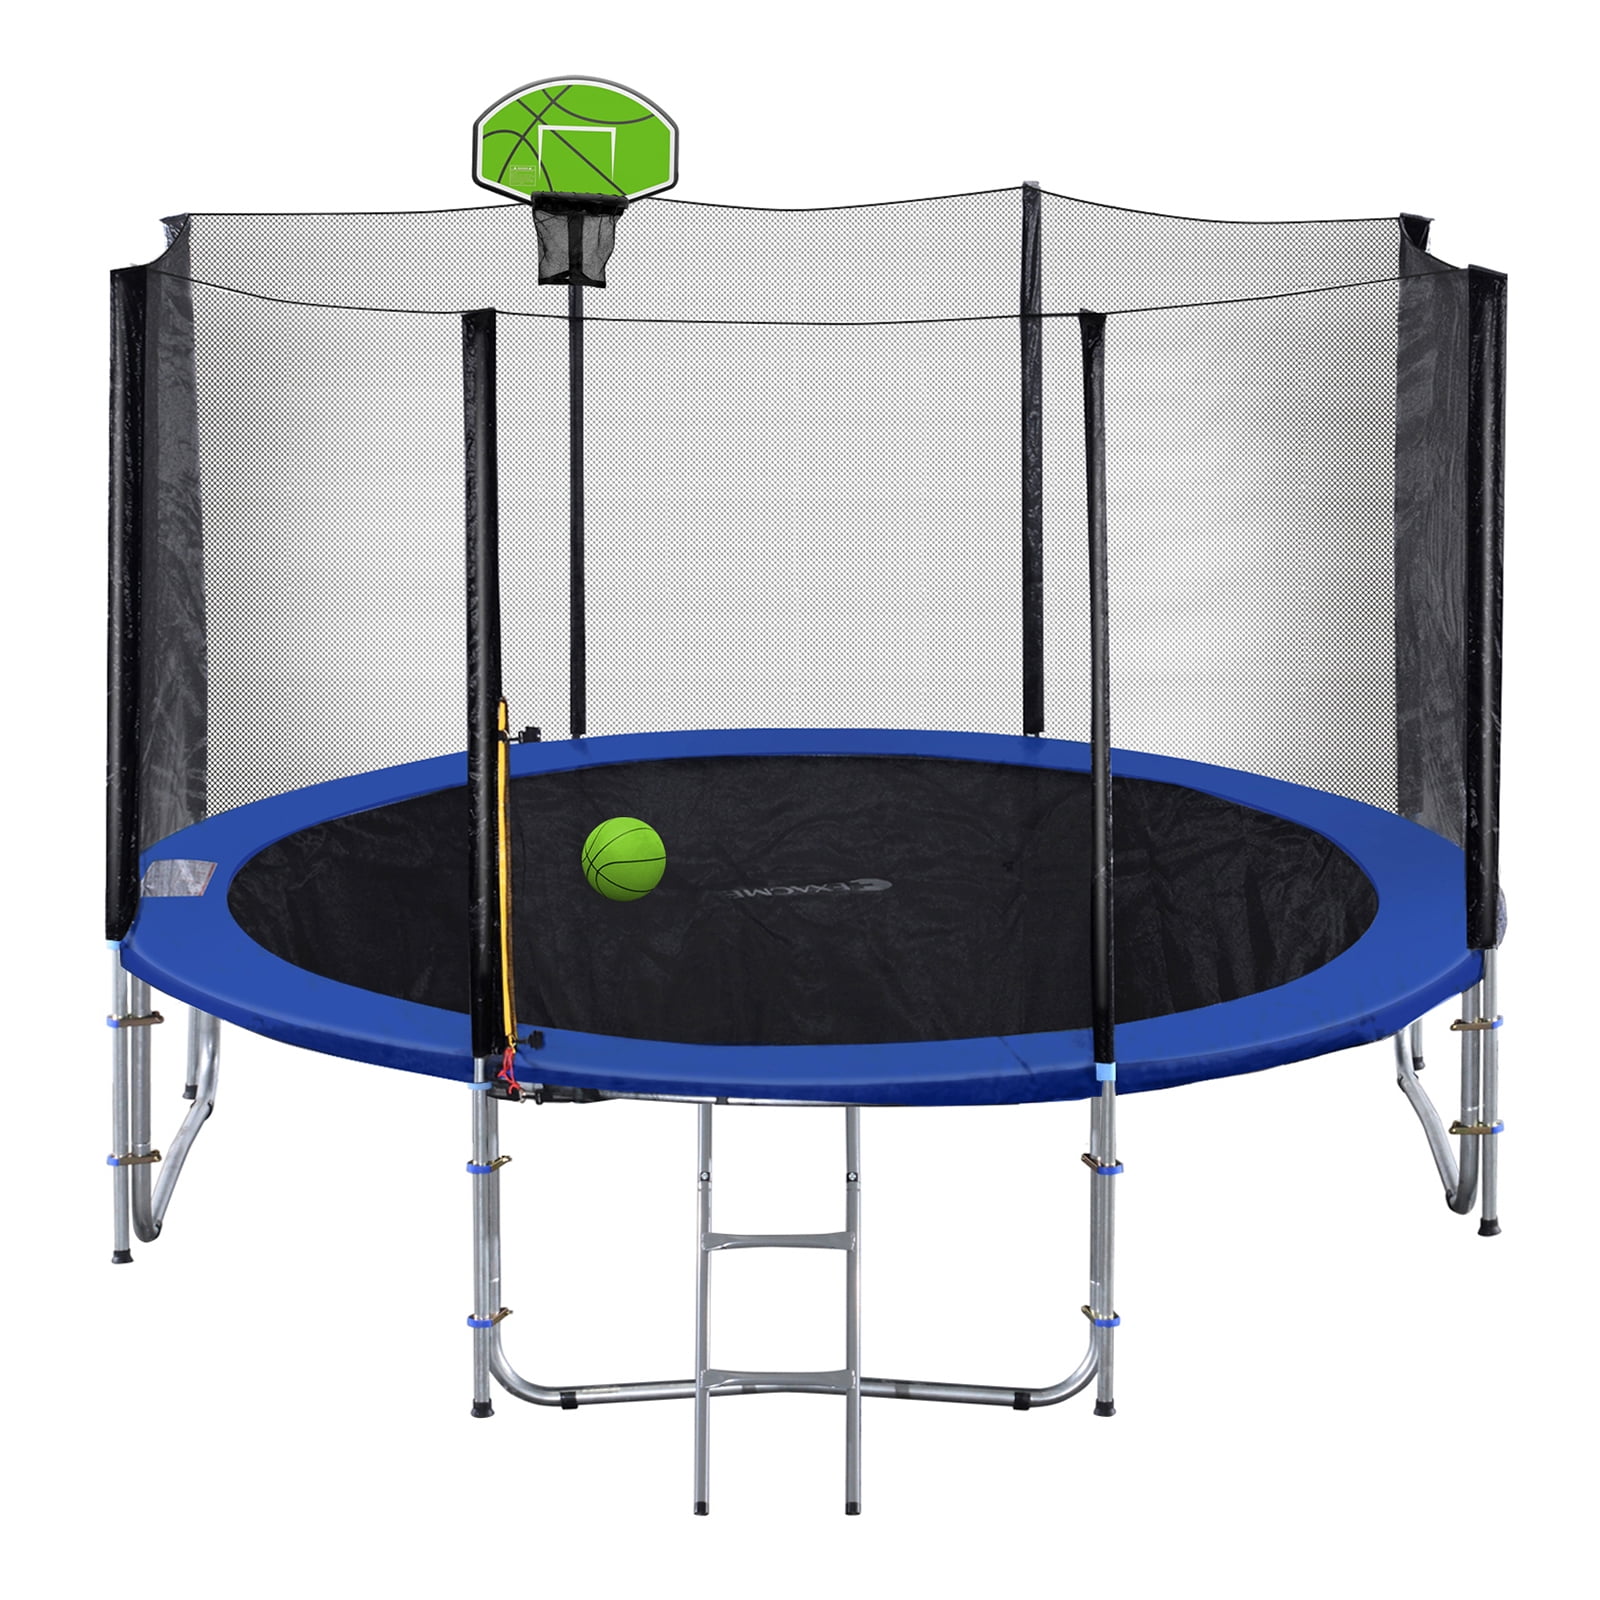 Exacme 10' Round Trampoline with Safety Enclosure